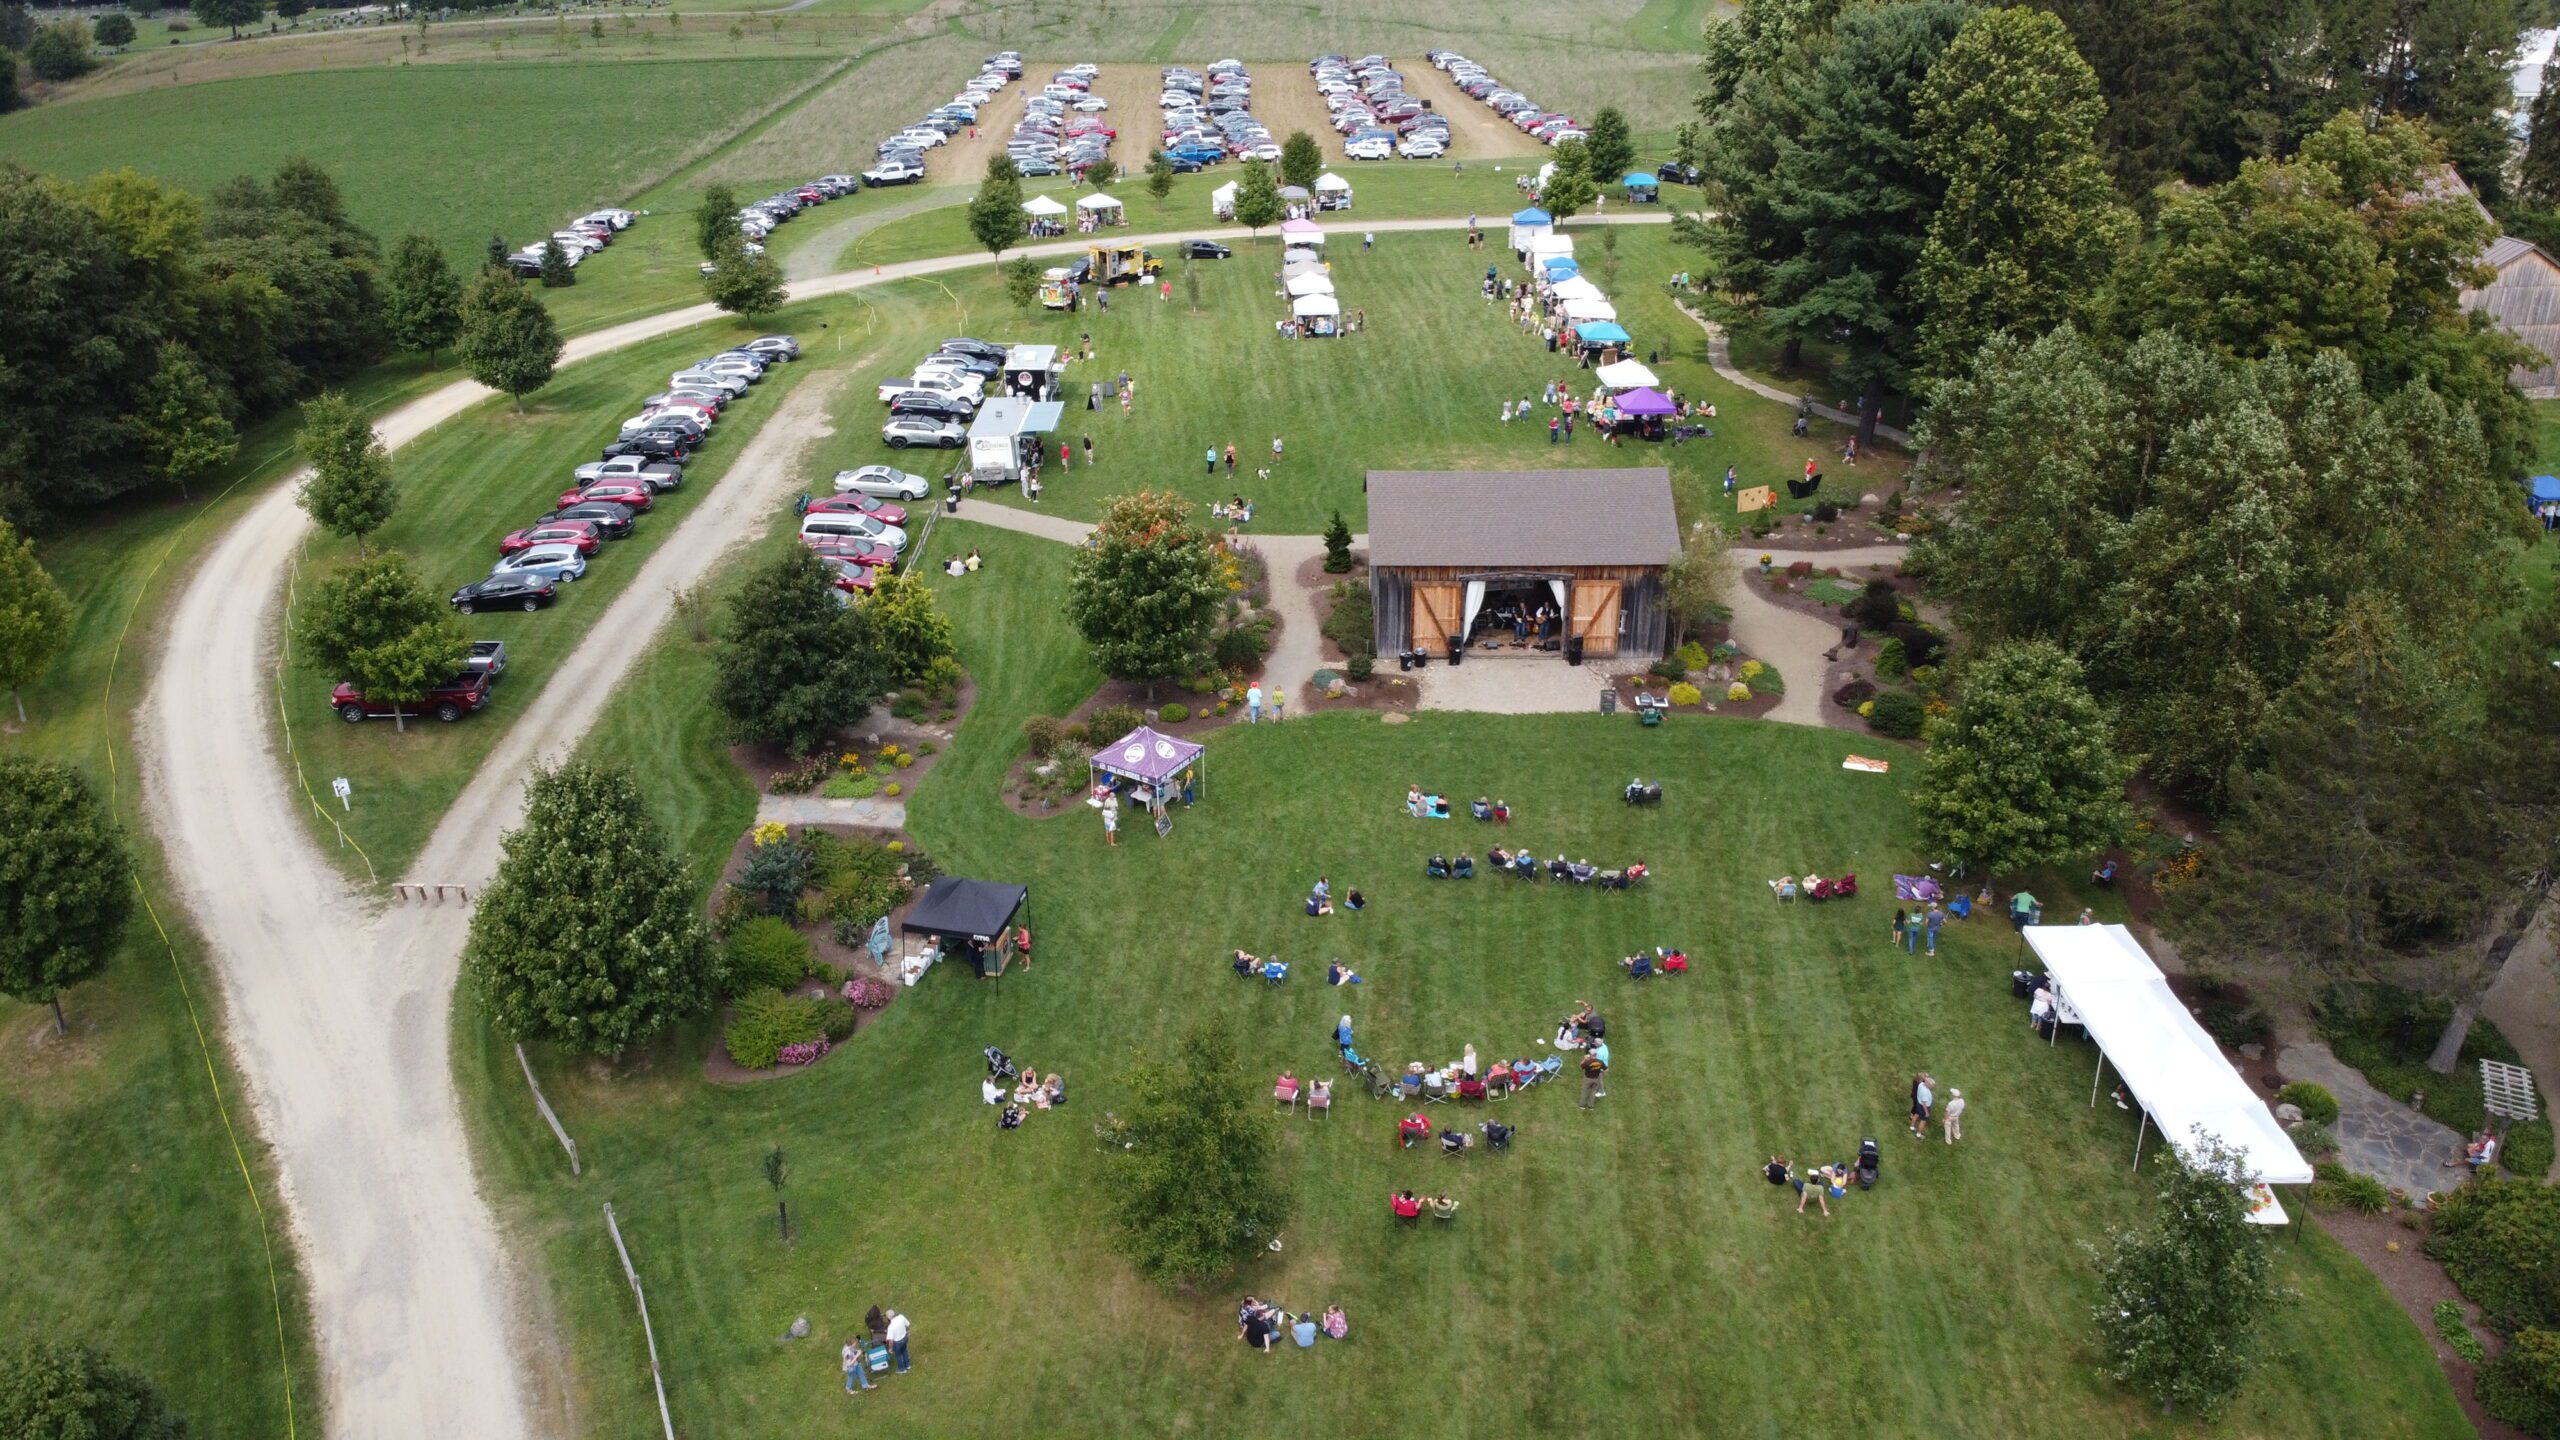 2021 Homegrown Harvest Festival Drone Photo: Taken from above, this photo shows the western grounds at Goodell Gardens & Homestead, including the Events Barn and southern Events Lawn. The lawns are filled with tents and people enjoying the festival. In the Background you can see the parking field.